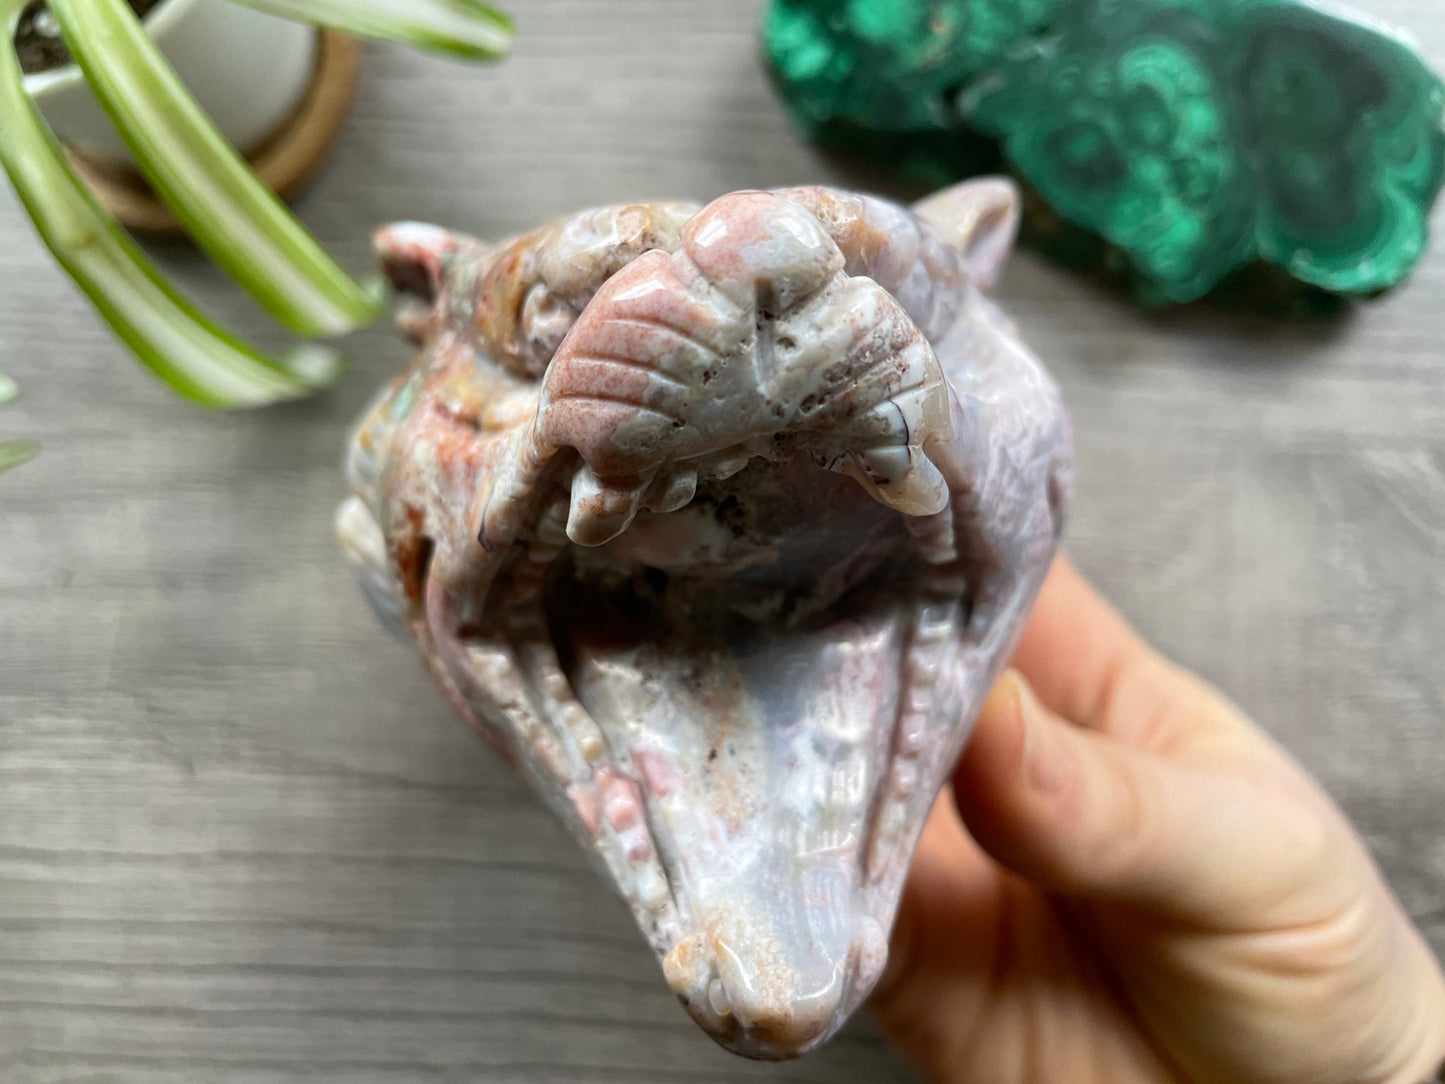 Pictured is a roaring tiger's head carved out of Indian agate.